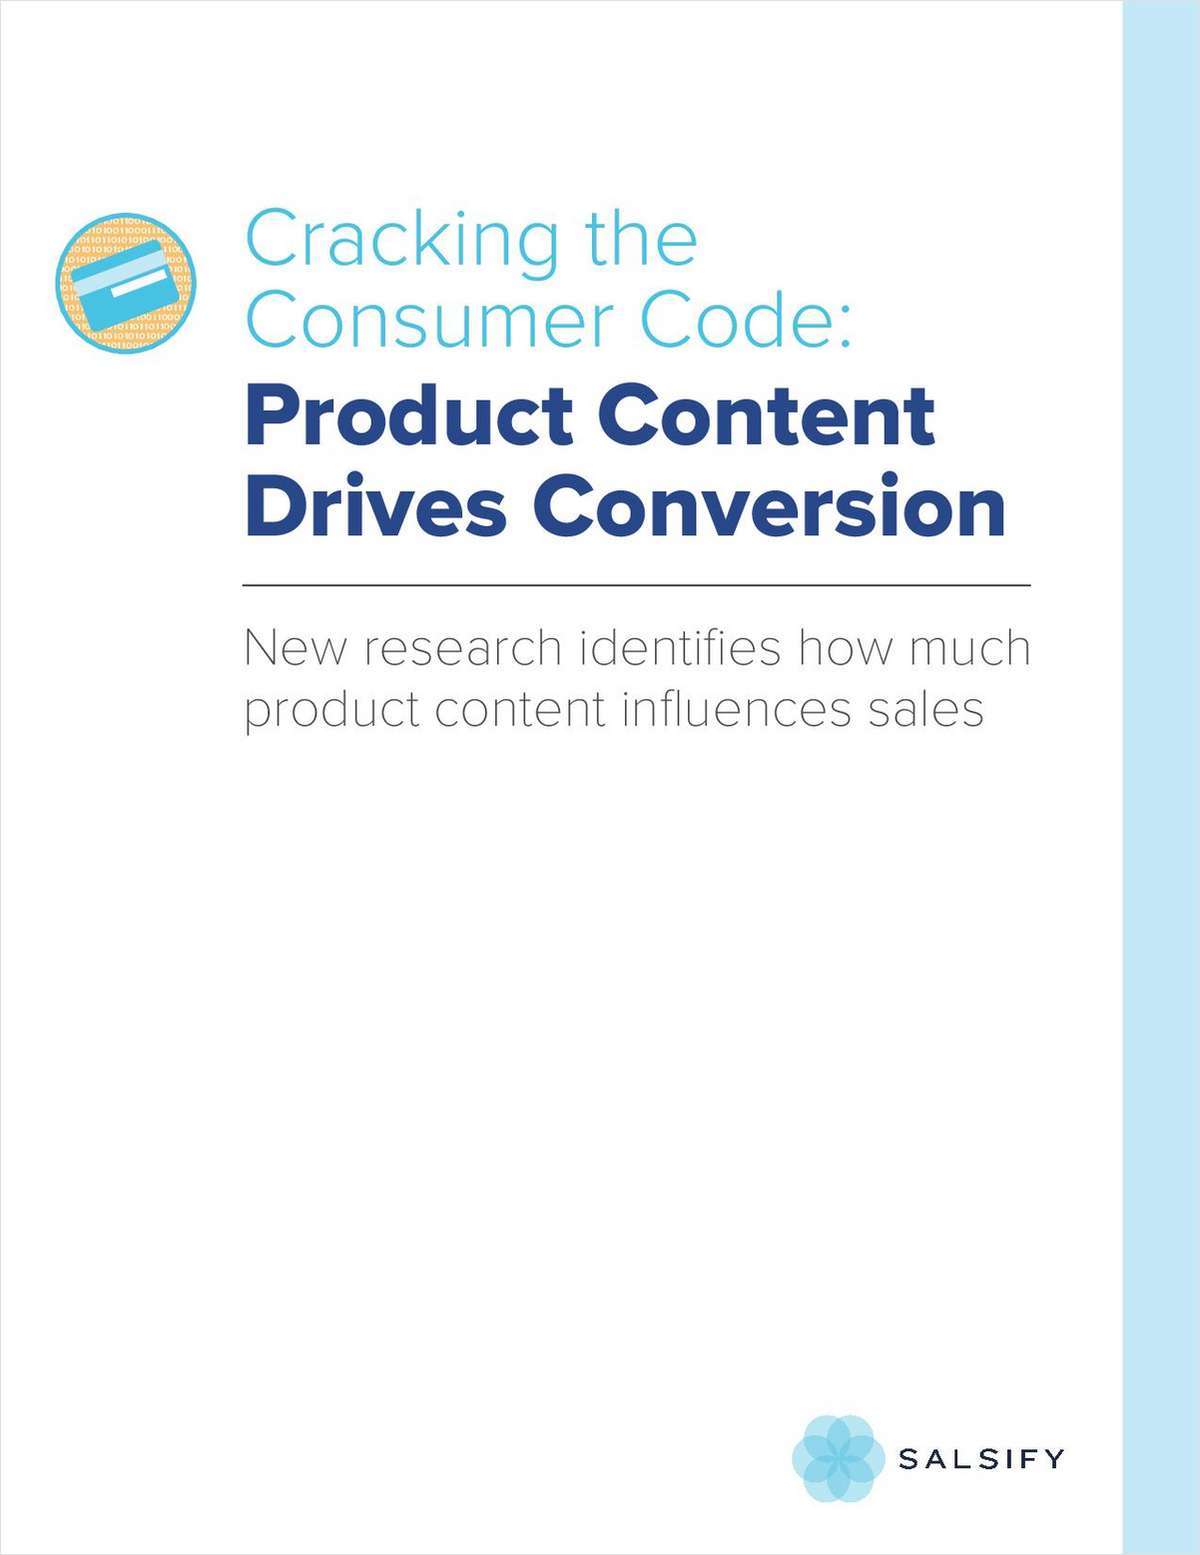 Cracking the Consumer Code: Product Content Drives Conversion